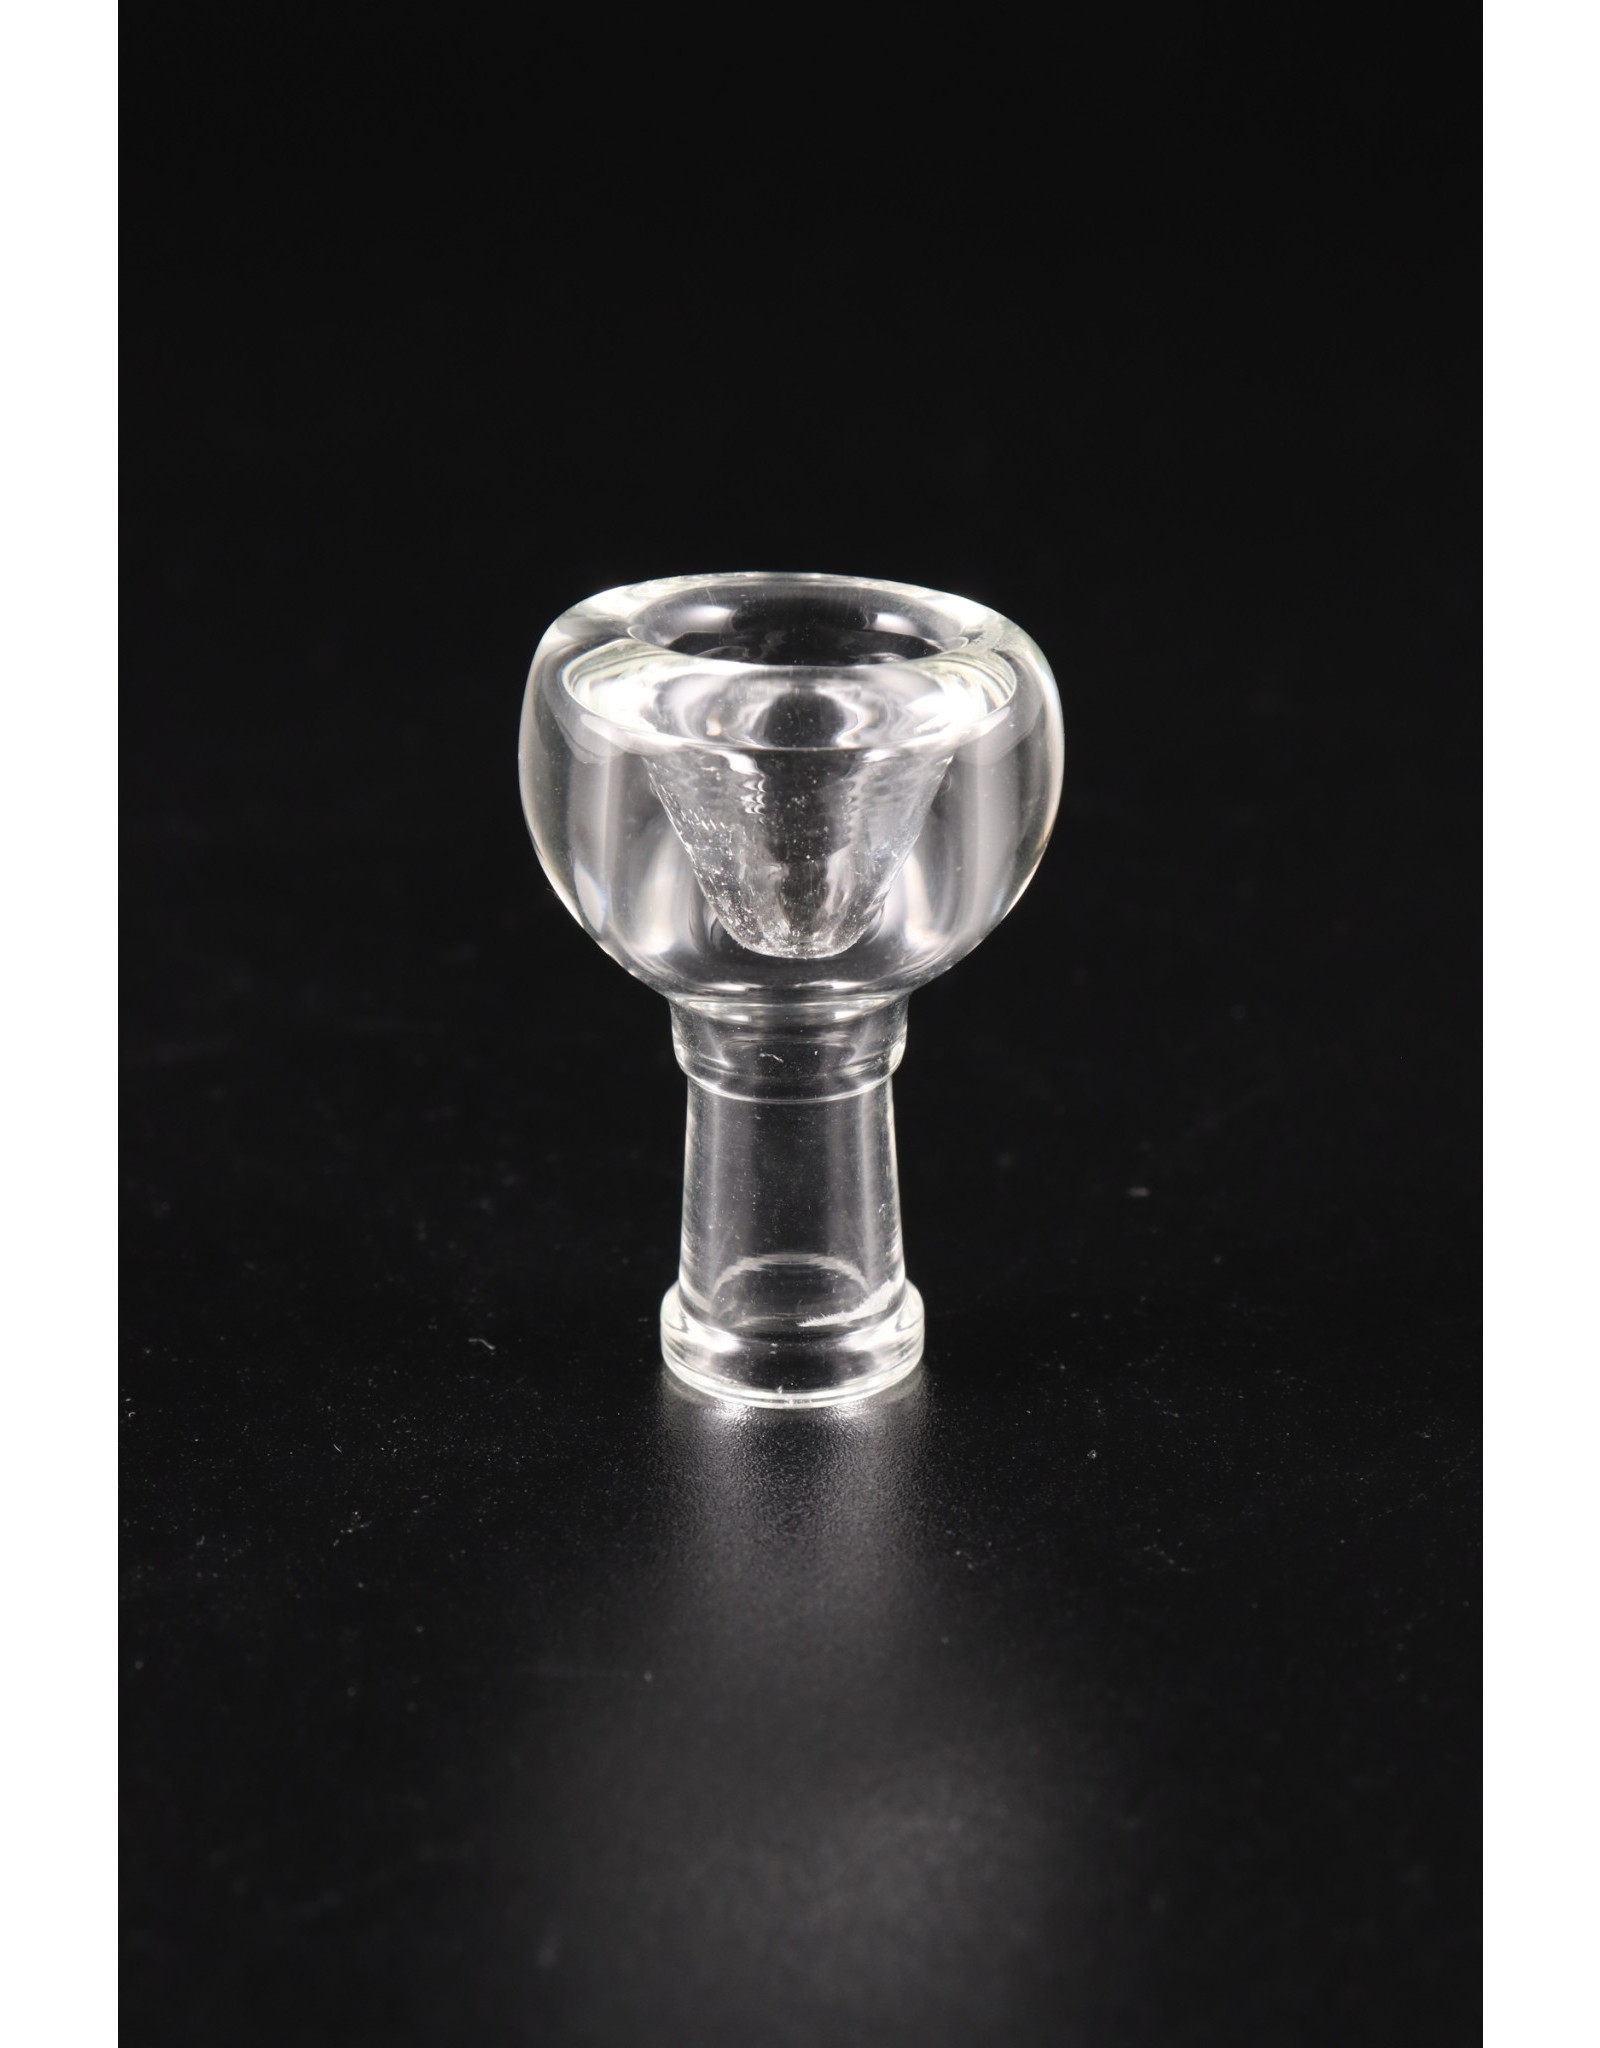 Lil Ben Clear 10mm Female GonG Bowl